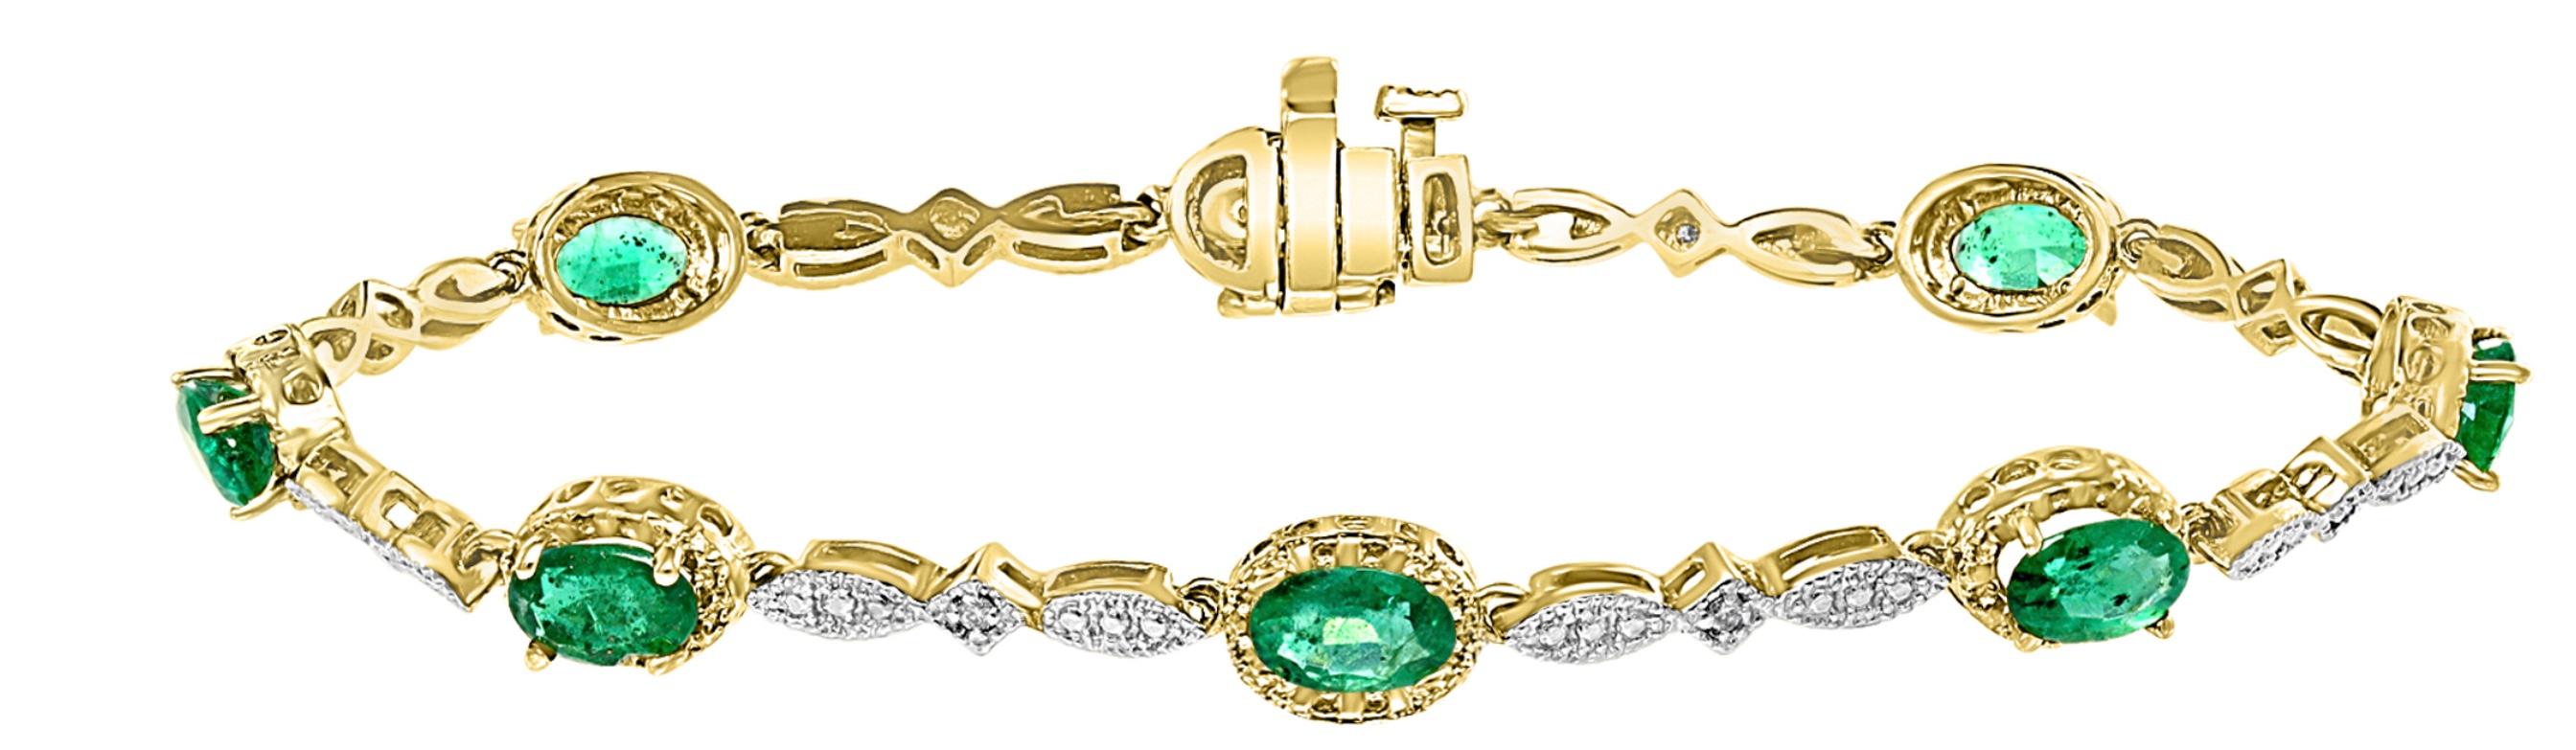  This exceptionally affordable Tennis  bracelet has 8 stones of oval  Emeralds  . Each Emerald is spaced by a diamond links.  
 Total weight of Emerald is  Approximately 2.5 carat. 
The bracelet is expertly crafted with 8 grams of  14 karat gold .